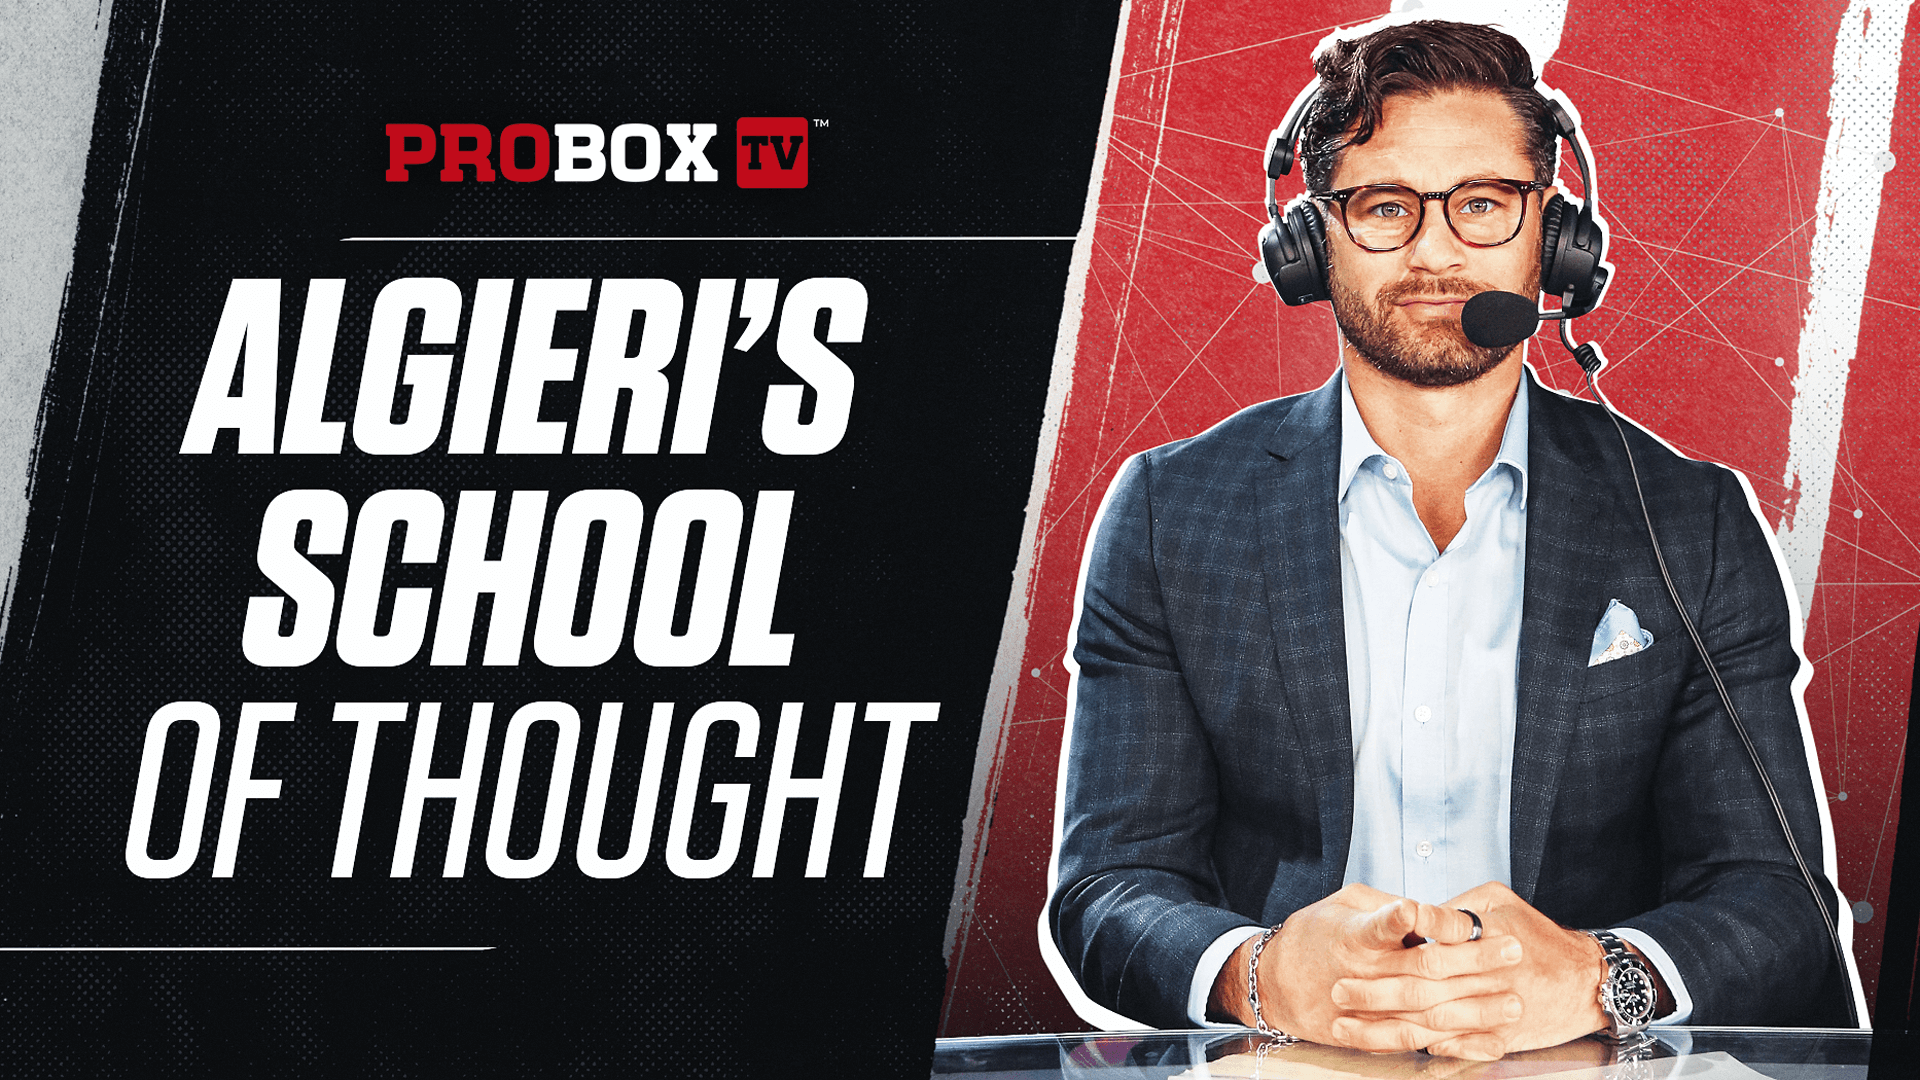 Chris Algieri's School of Thought: Masterful Inoue should unify then move up to challenge Ramirez